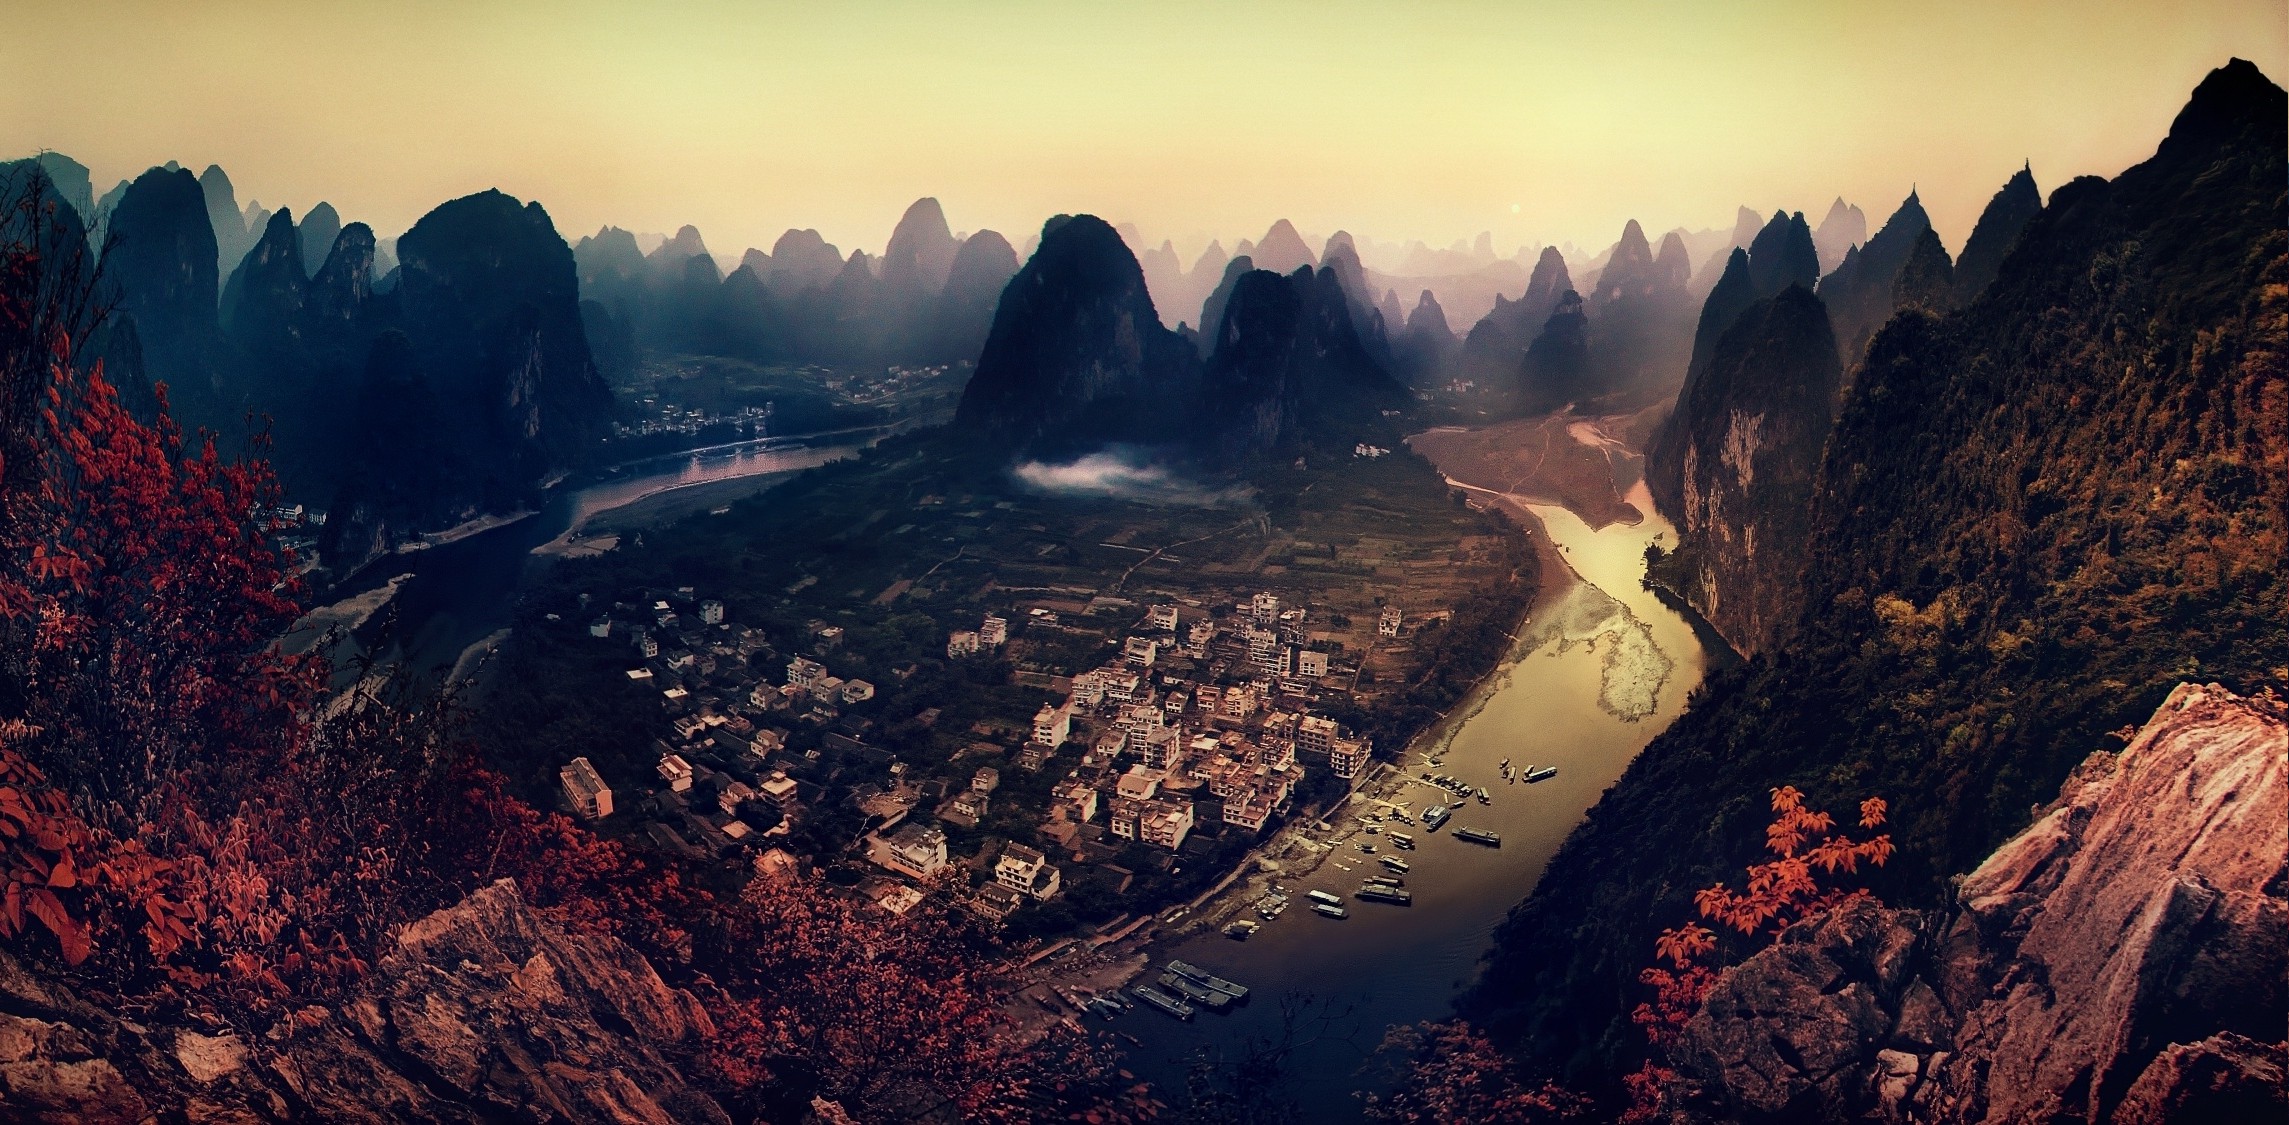 mountain, Cityscape, River, Fall, Field, Forest, Mist, Sunset, China, Building, Nature, Panoramas, Landscape Wallpaper